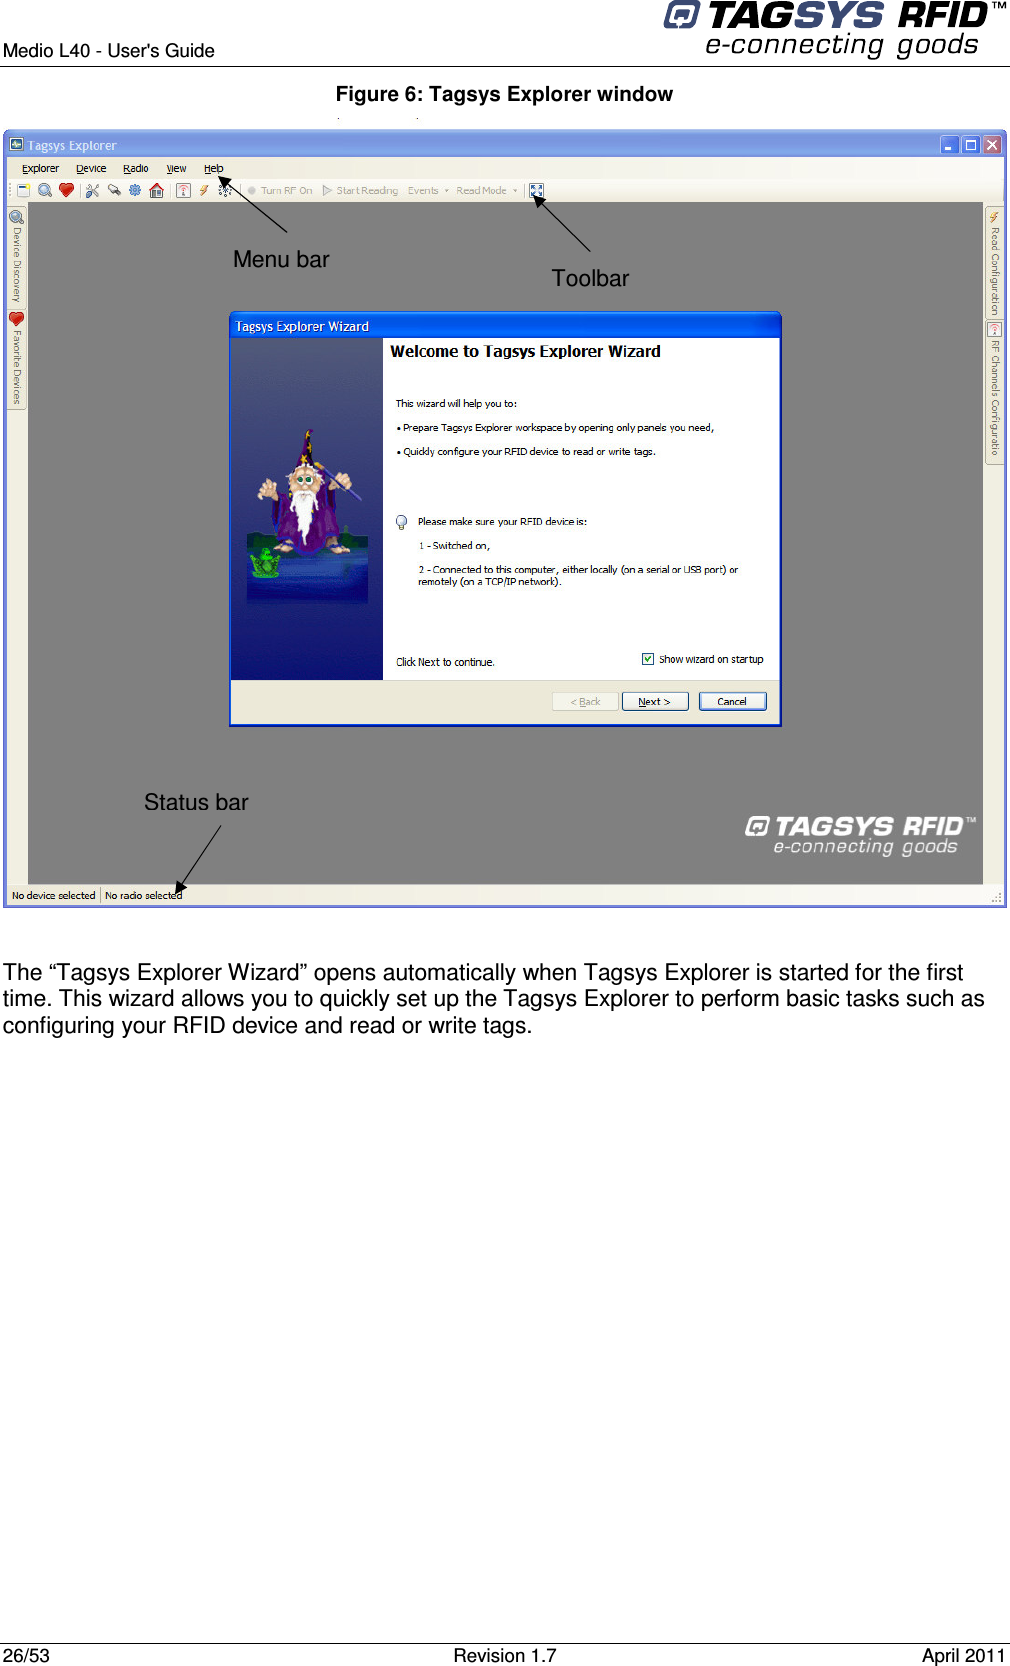  Medio L40 - User&apos;s Guide     26/53  Revision 1.7  April 2011  Figure 6: Tagsys Explorer window   The “Tagsys Explorer Wizard” opens automatically when Tagsys Explorer is started for the first time. This wizard allows you to quickly set up the Tagsys Explorer to perform basic tasks such as configuring your RFID device and read or write tags. Toolbar  Menu bar  Status bar 